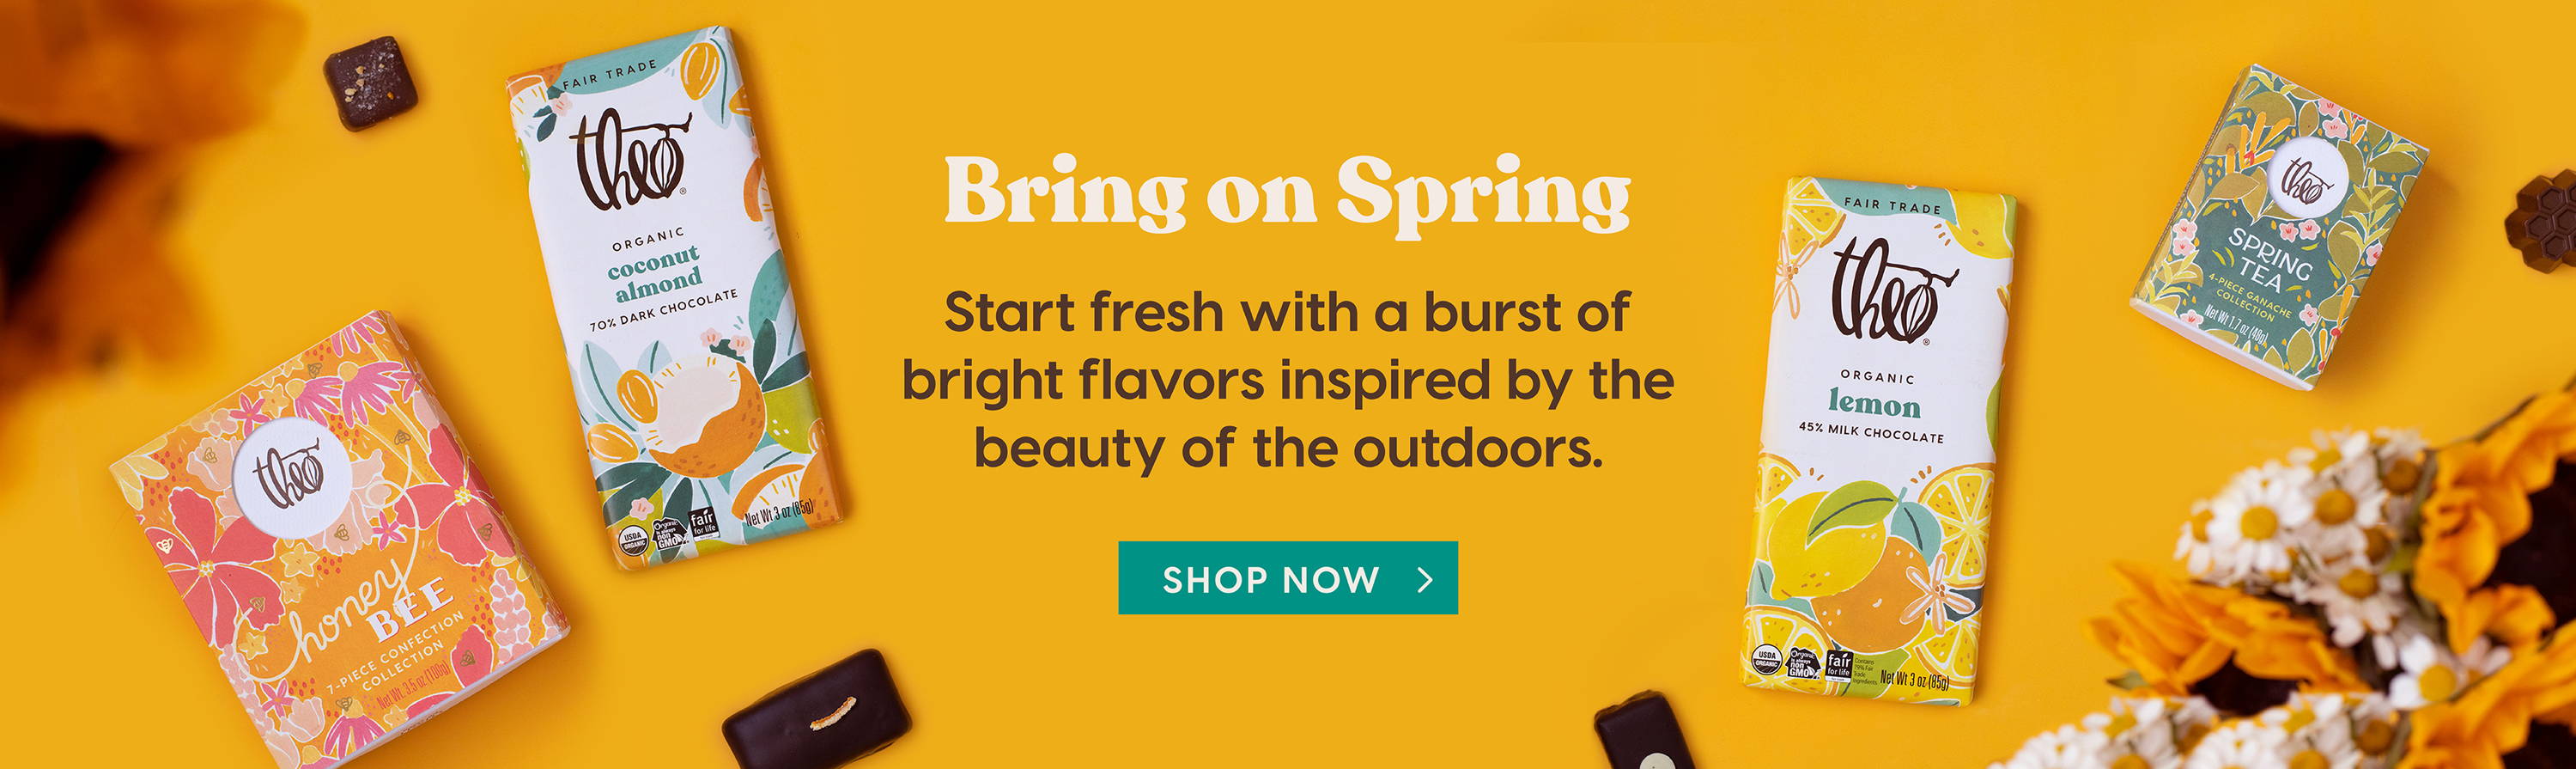 Bring on Spring: Start Fresh with a burst of bright flavors